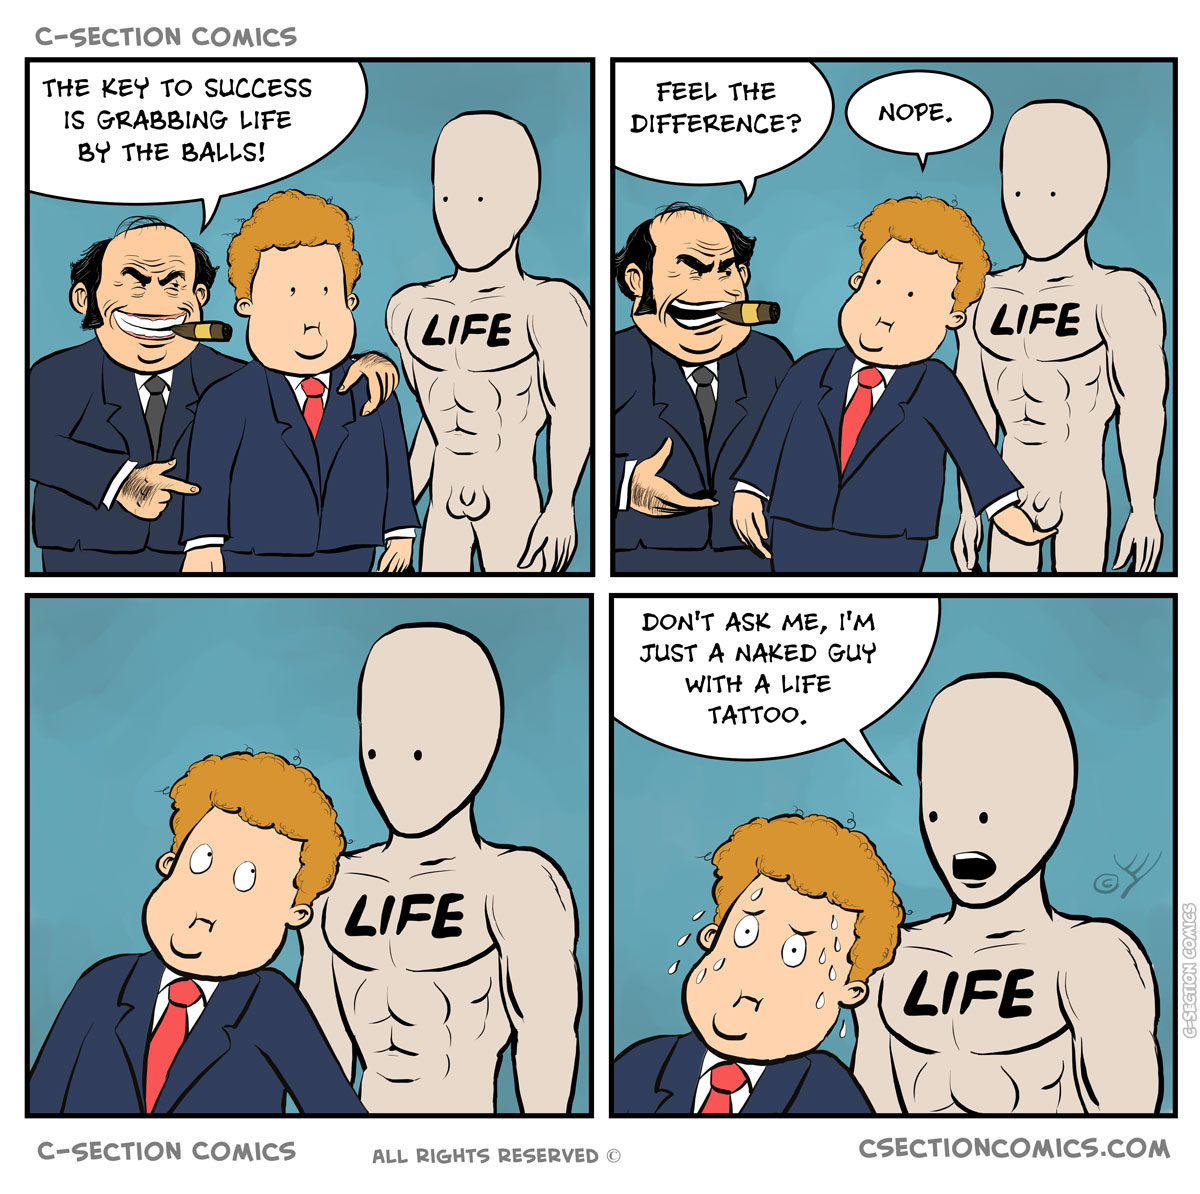 Grab Life by the Balls - by C-Section Comics